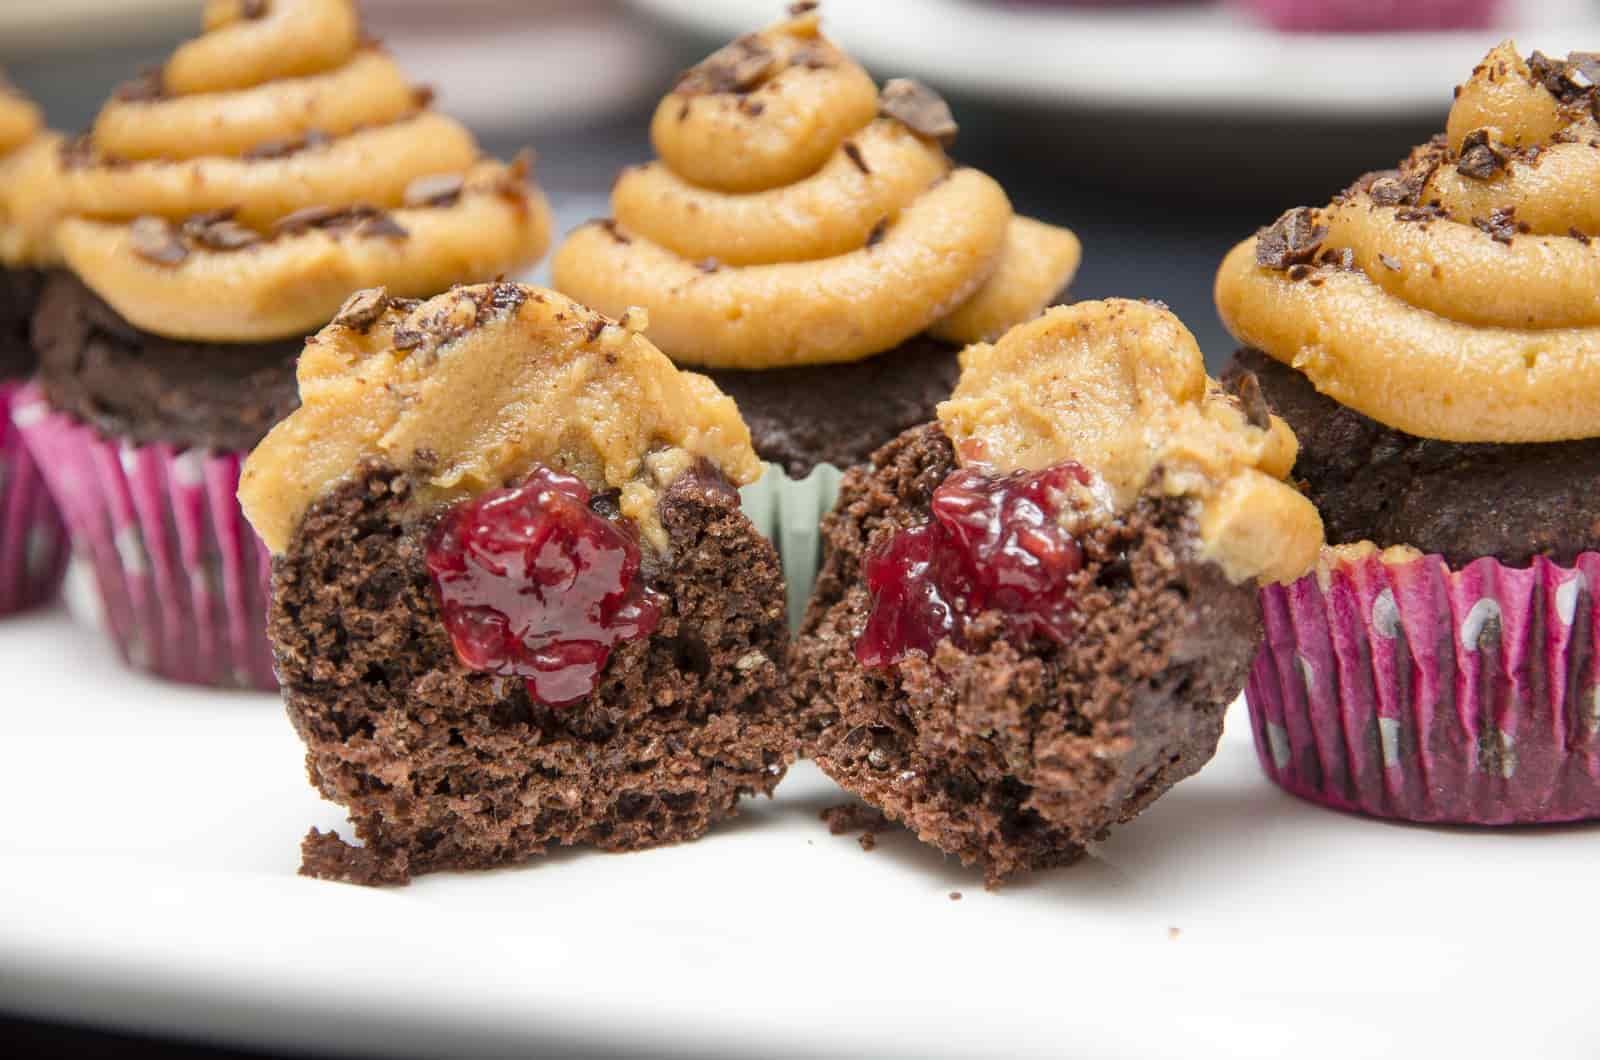 Raspberry Peanut Butter Cupcakes - Nutracelle